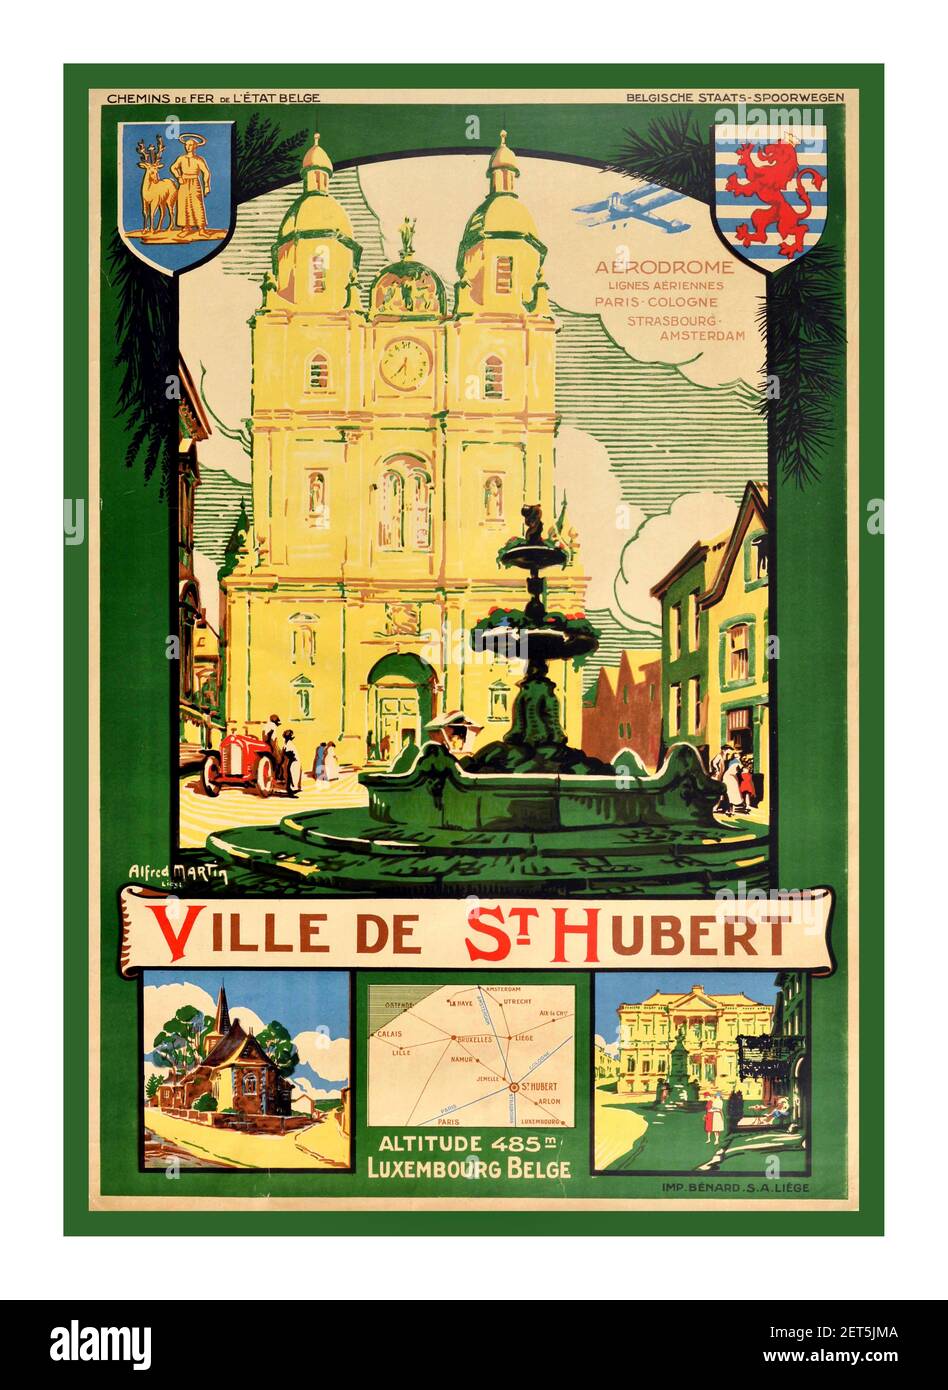 VINTAGE 1920's TRAVEL POSTER VILLE DE ST HUBERT LUXEMBOURG BELGIUM Original vintage travel poster for the Ville de St Hubert altitude 485m Luxembourg Belge featuring the historical benedictine Abbey of Saint-Hubert (established 687), named after saint Hubertus / Hubert  with the fountain in the foreground and a plane flying above text reading - Aerodrome Lignes Aeriennes Paris Cologne Strasbourg Amsterdam - against a cloud in the striped green sky by two coat of arms in the corners.Chemins de Fer de l'Etat Belge. Belgium, designer: Alfred Martin,1925 Stock Photo